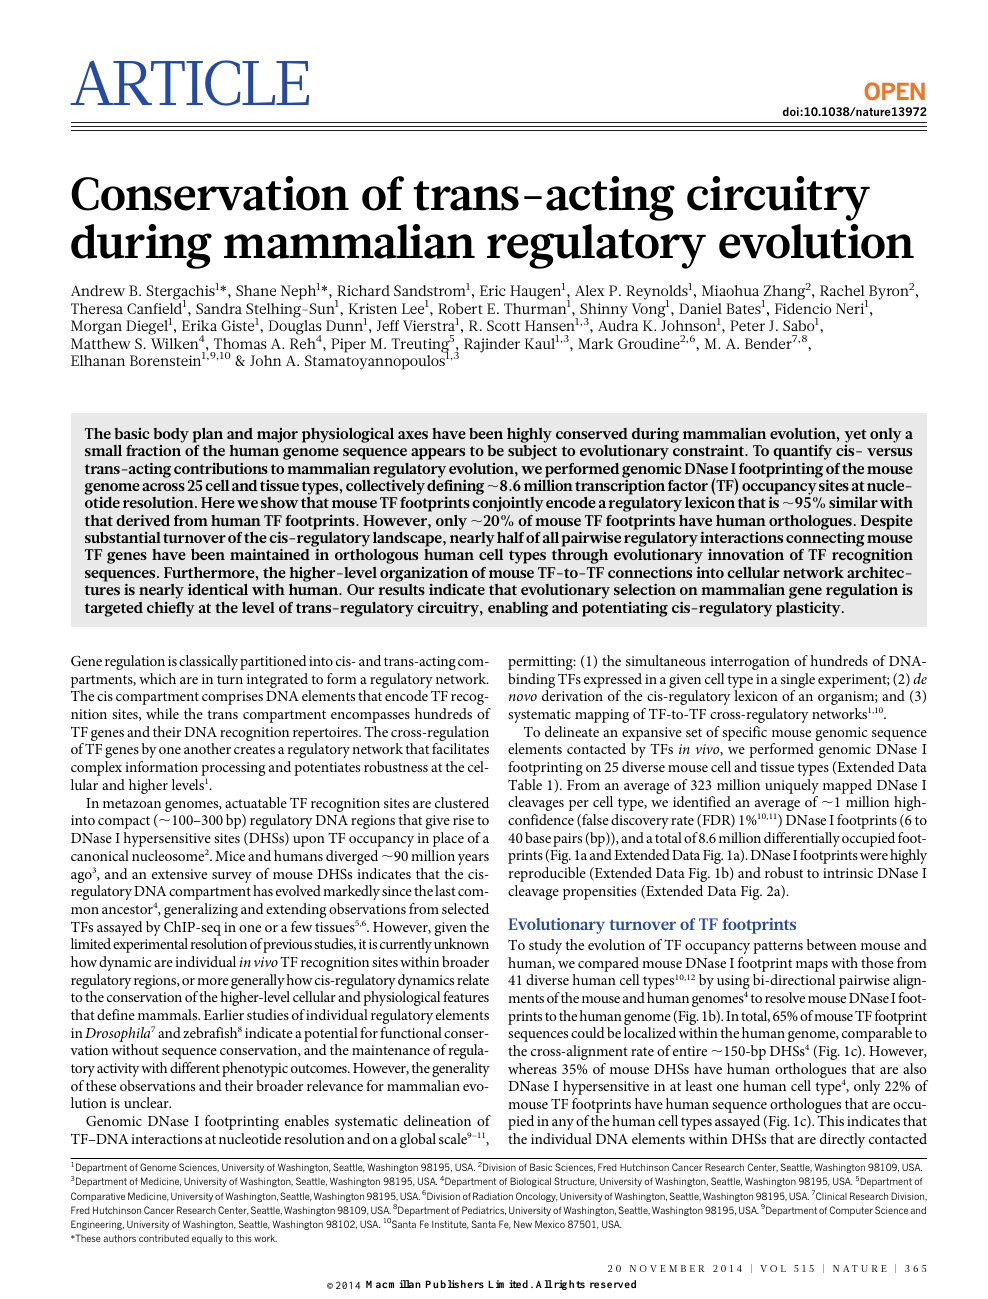 Conservation Of Trans Acting Circuitry During Mammalian Regulatory Evolution Topic Of Research Paper In Biological Sciences Download Scholarly Article Pdf And Read For Free On Cyberleninka Open Science Hub